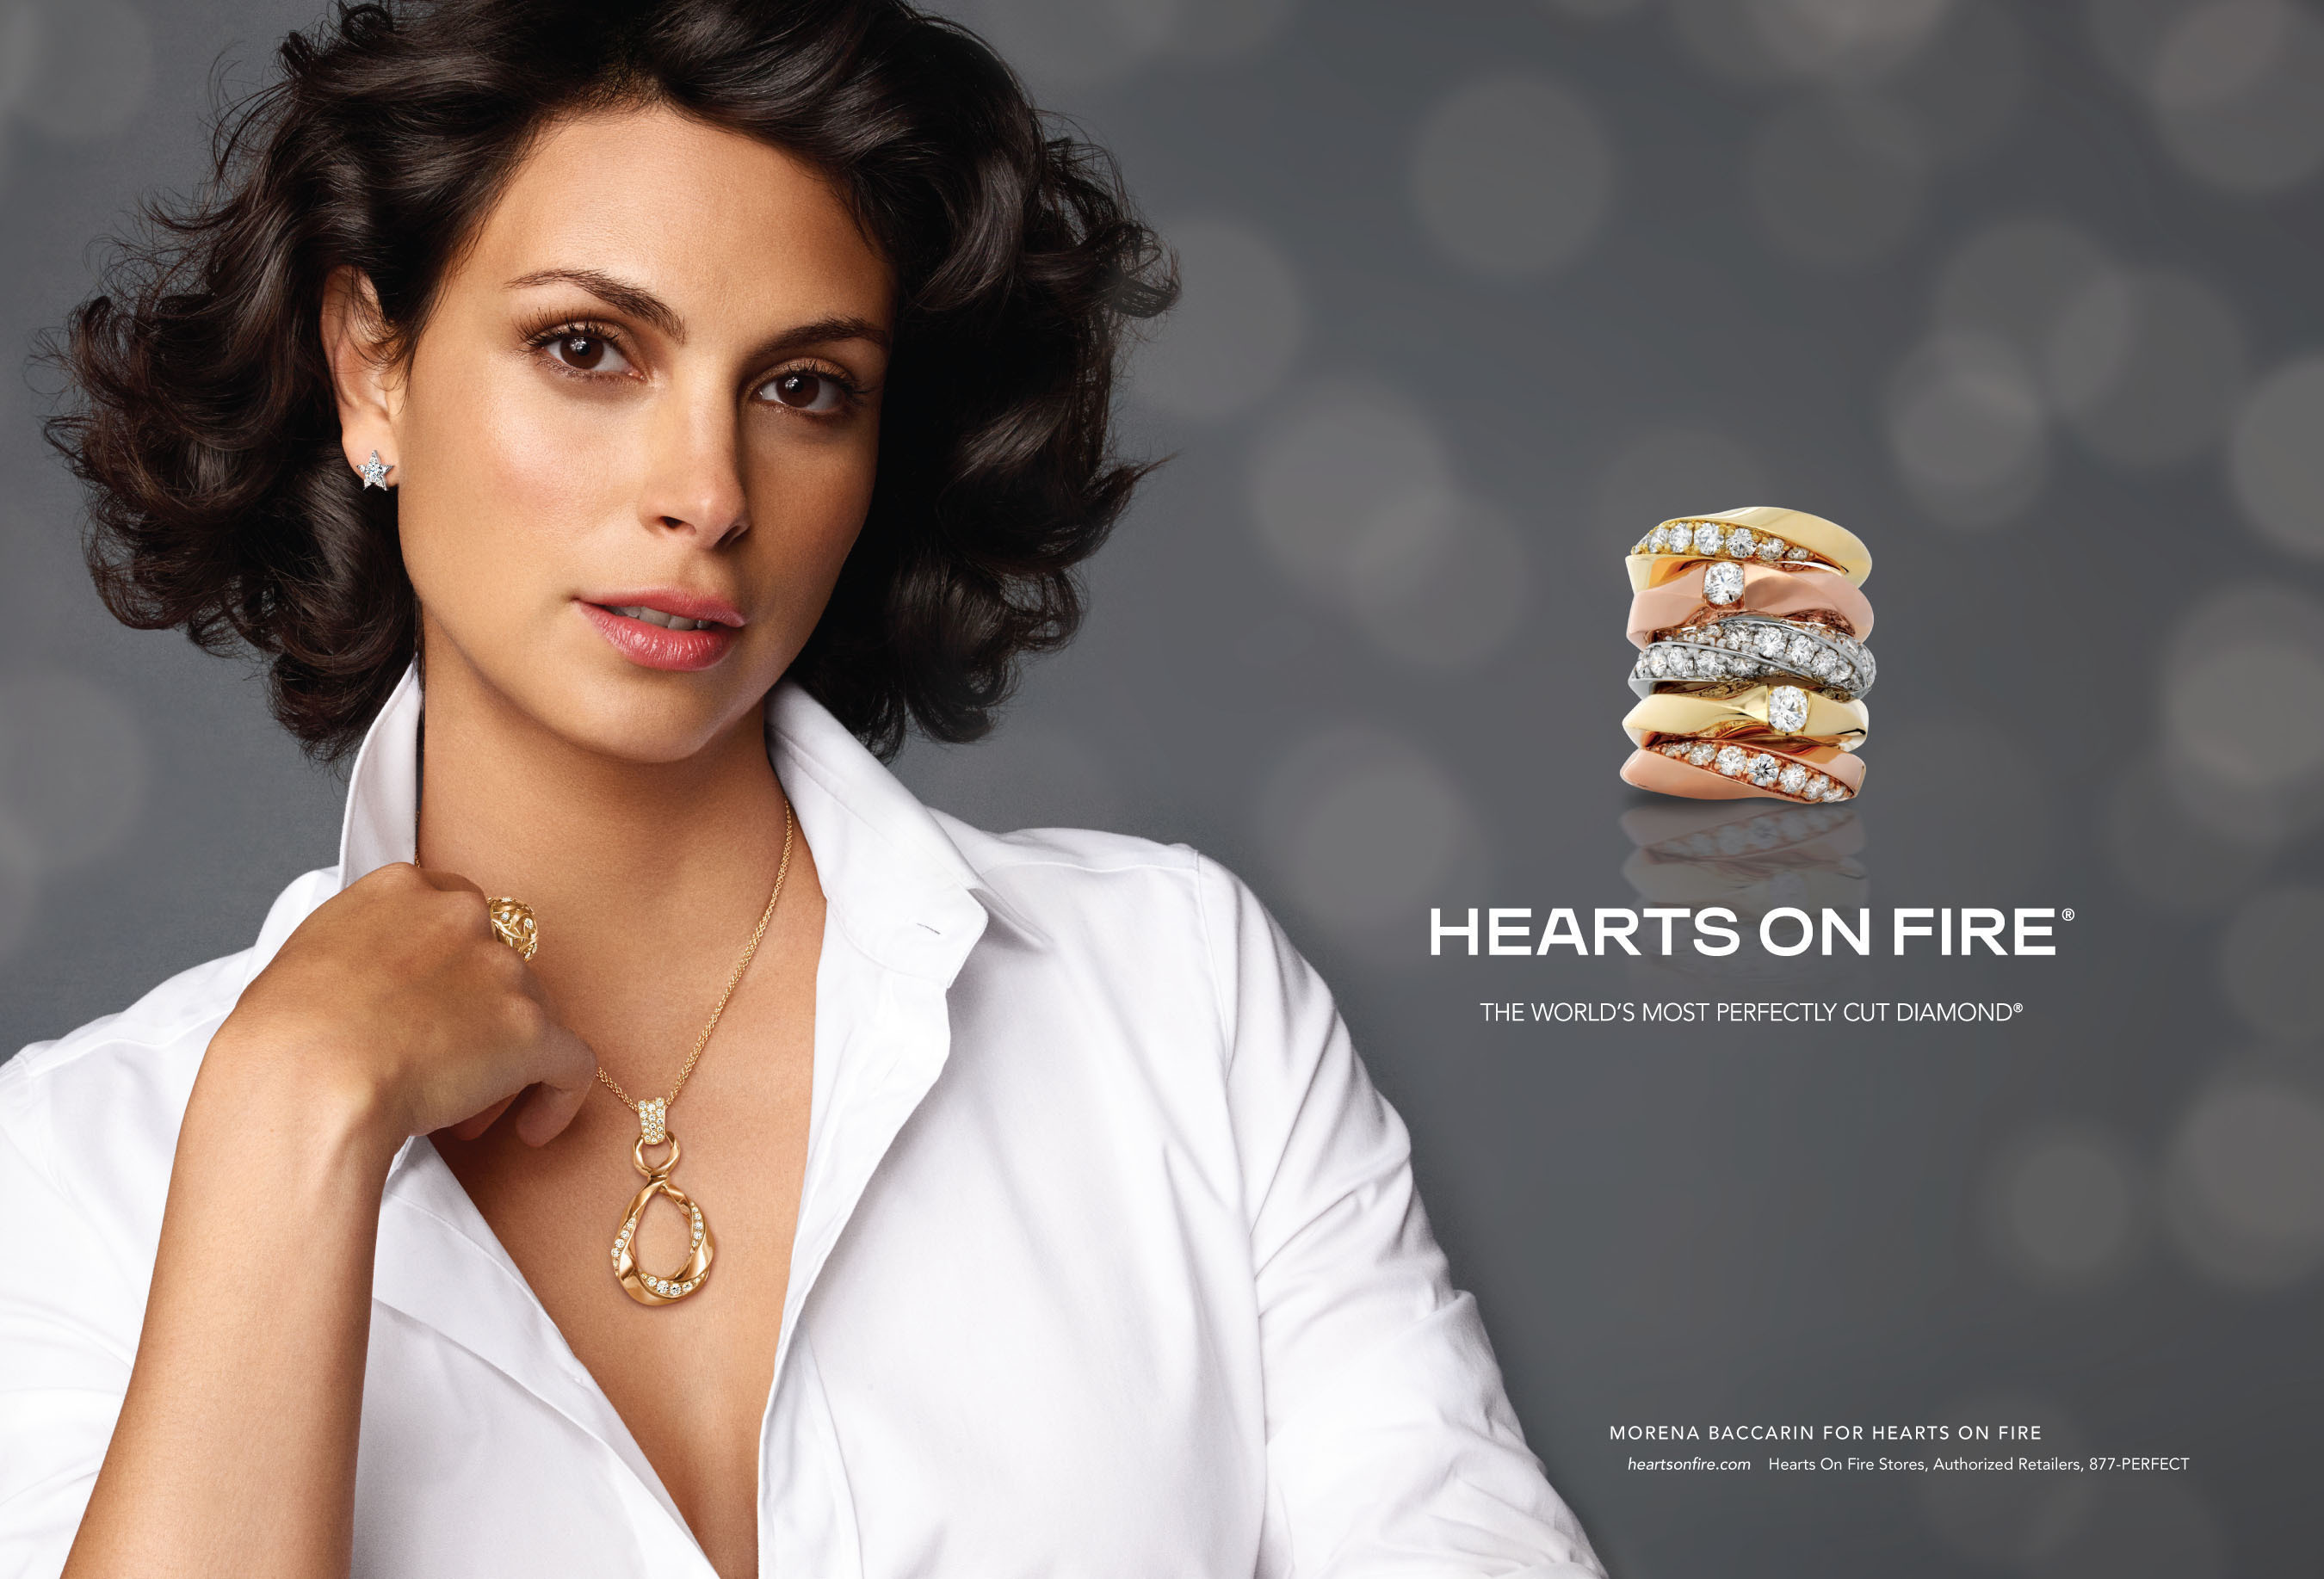 Morena Baccarin, Emmy nominated actress and star of Showtime's hit series Homeland, is officially named the new face of Hearts On Fire advertising, starting September 2013. (PRNewsFoto/Hearts On Fire) (PRNewsFoto/HEARTS ON FIRE)